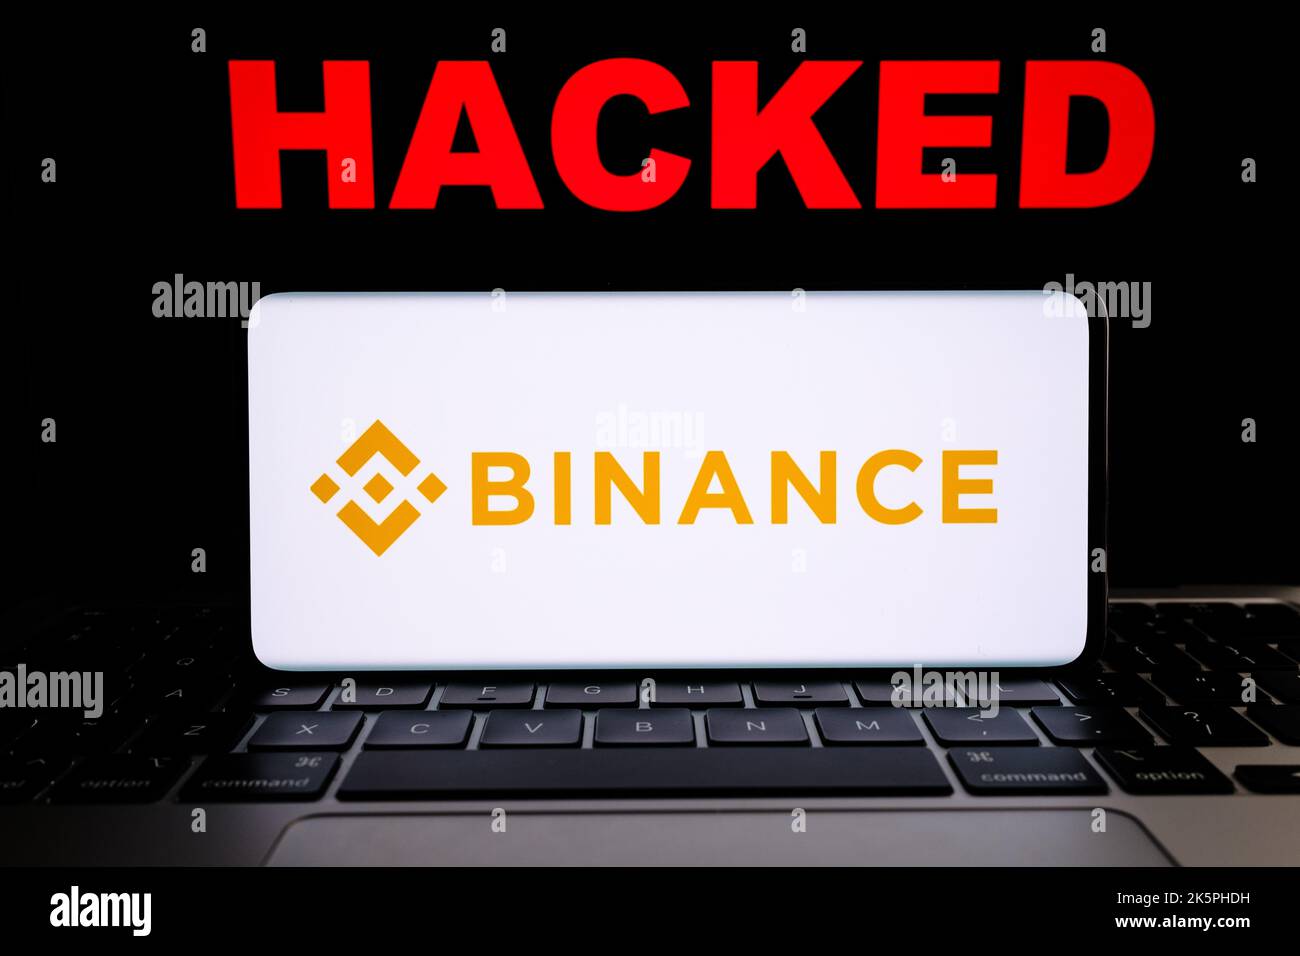 Binance crypto exchange hacked. Binance logo seen on smartphne and red text 'HACKED' seen on laptop. Concept. Stafford, United Kingdom, October 9, 202 Stock Photo